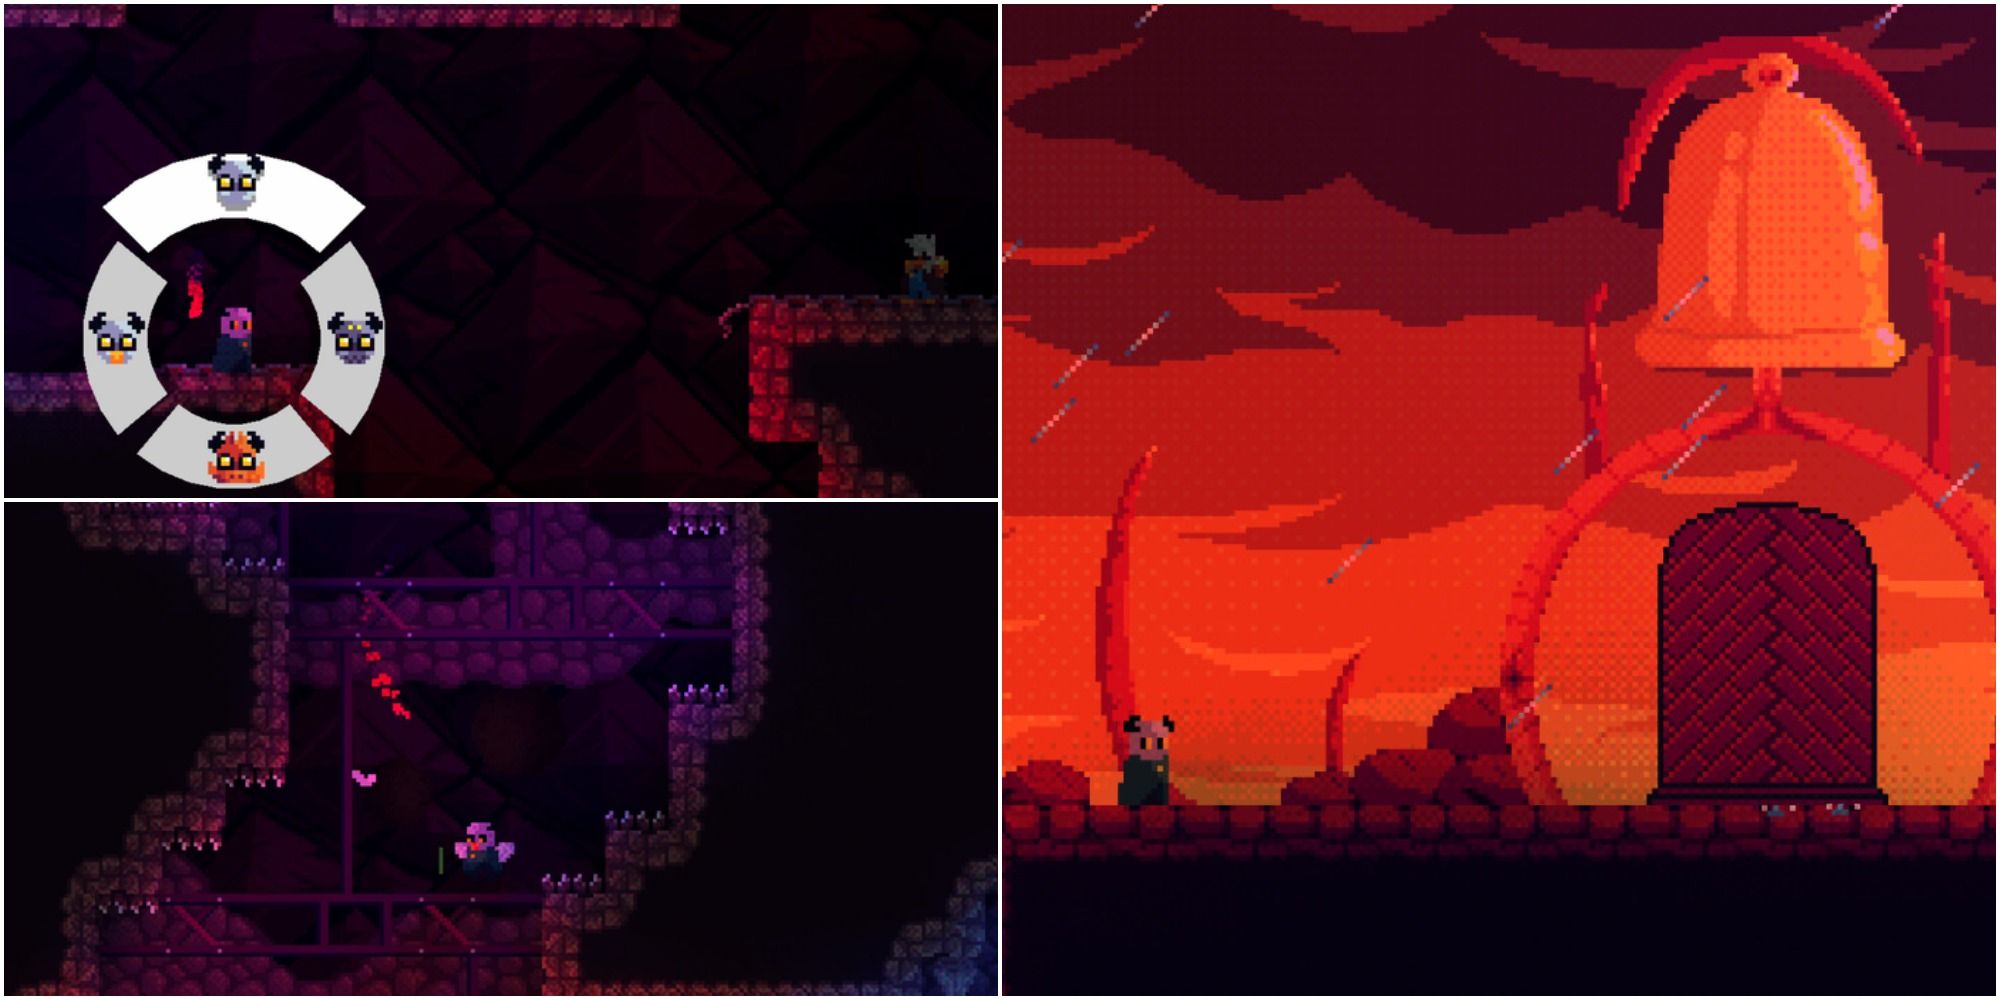 Soulchild split image Three cavernous areas in the game Soulchild lit in moody purple and red lighting